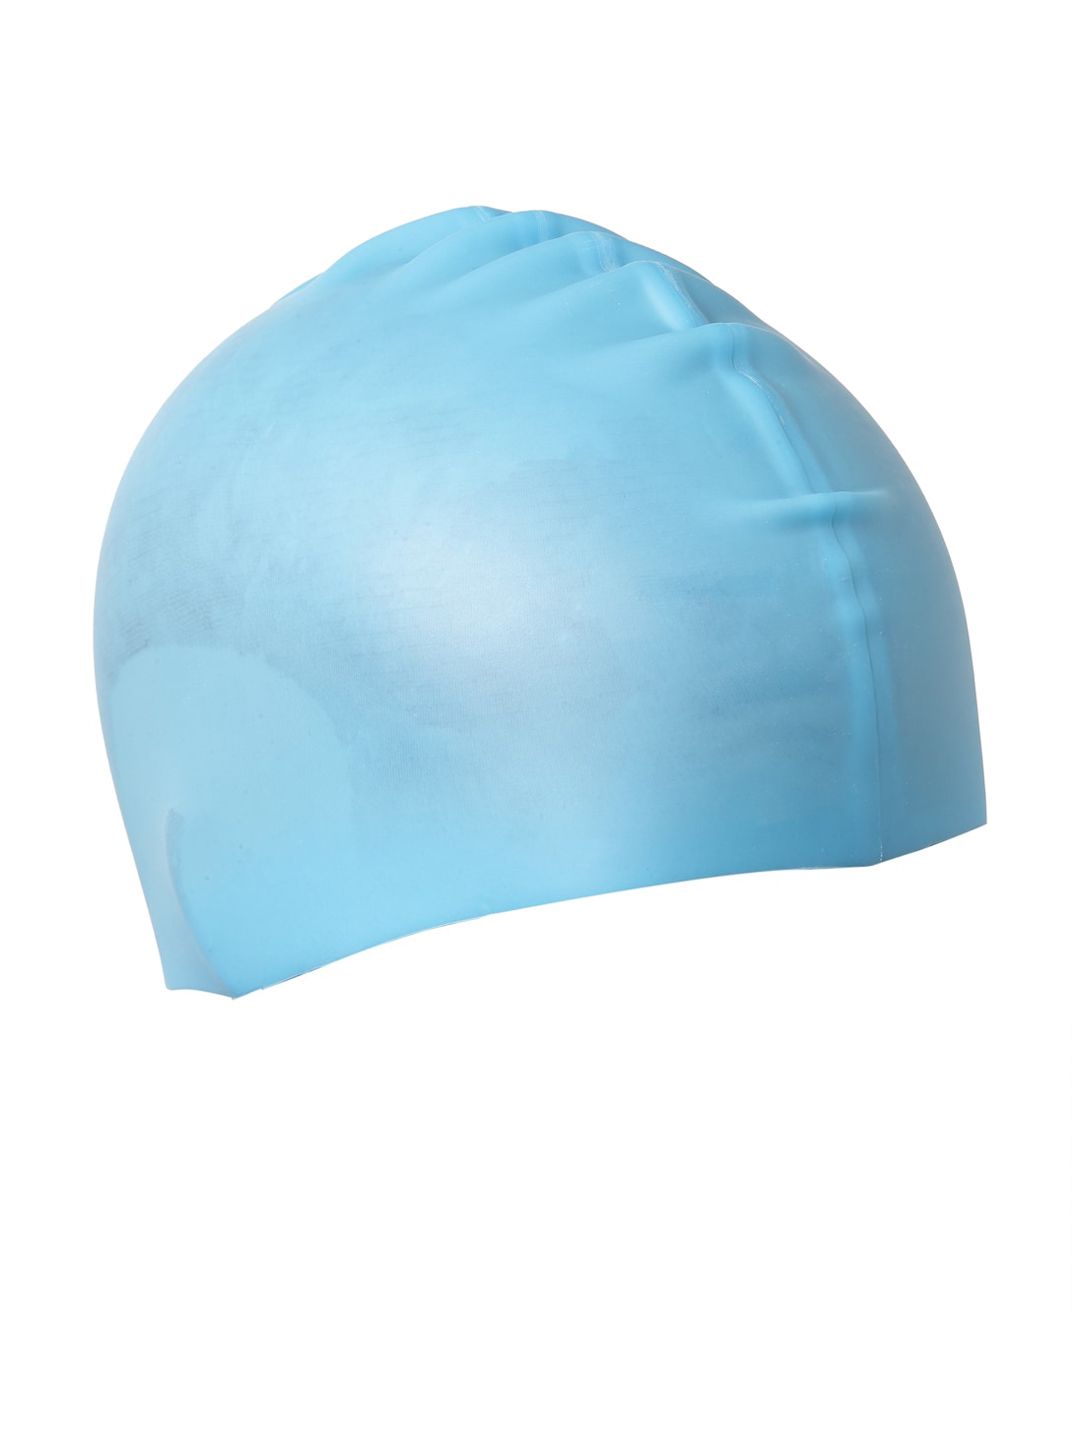 CUKOO Women Blue Solid Comfort-Fit Swimming Cap Price in India